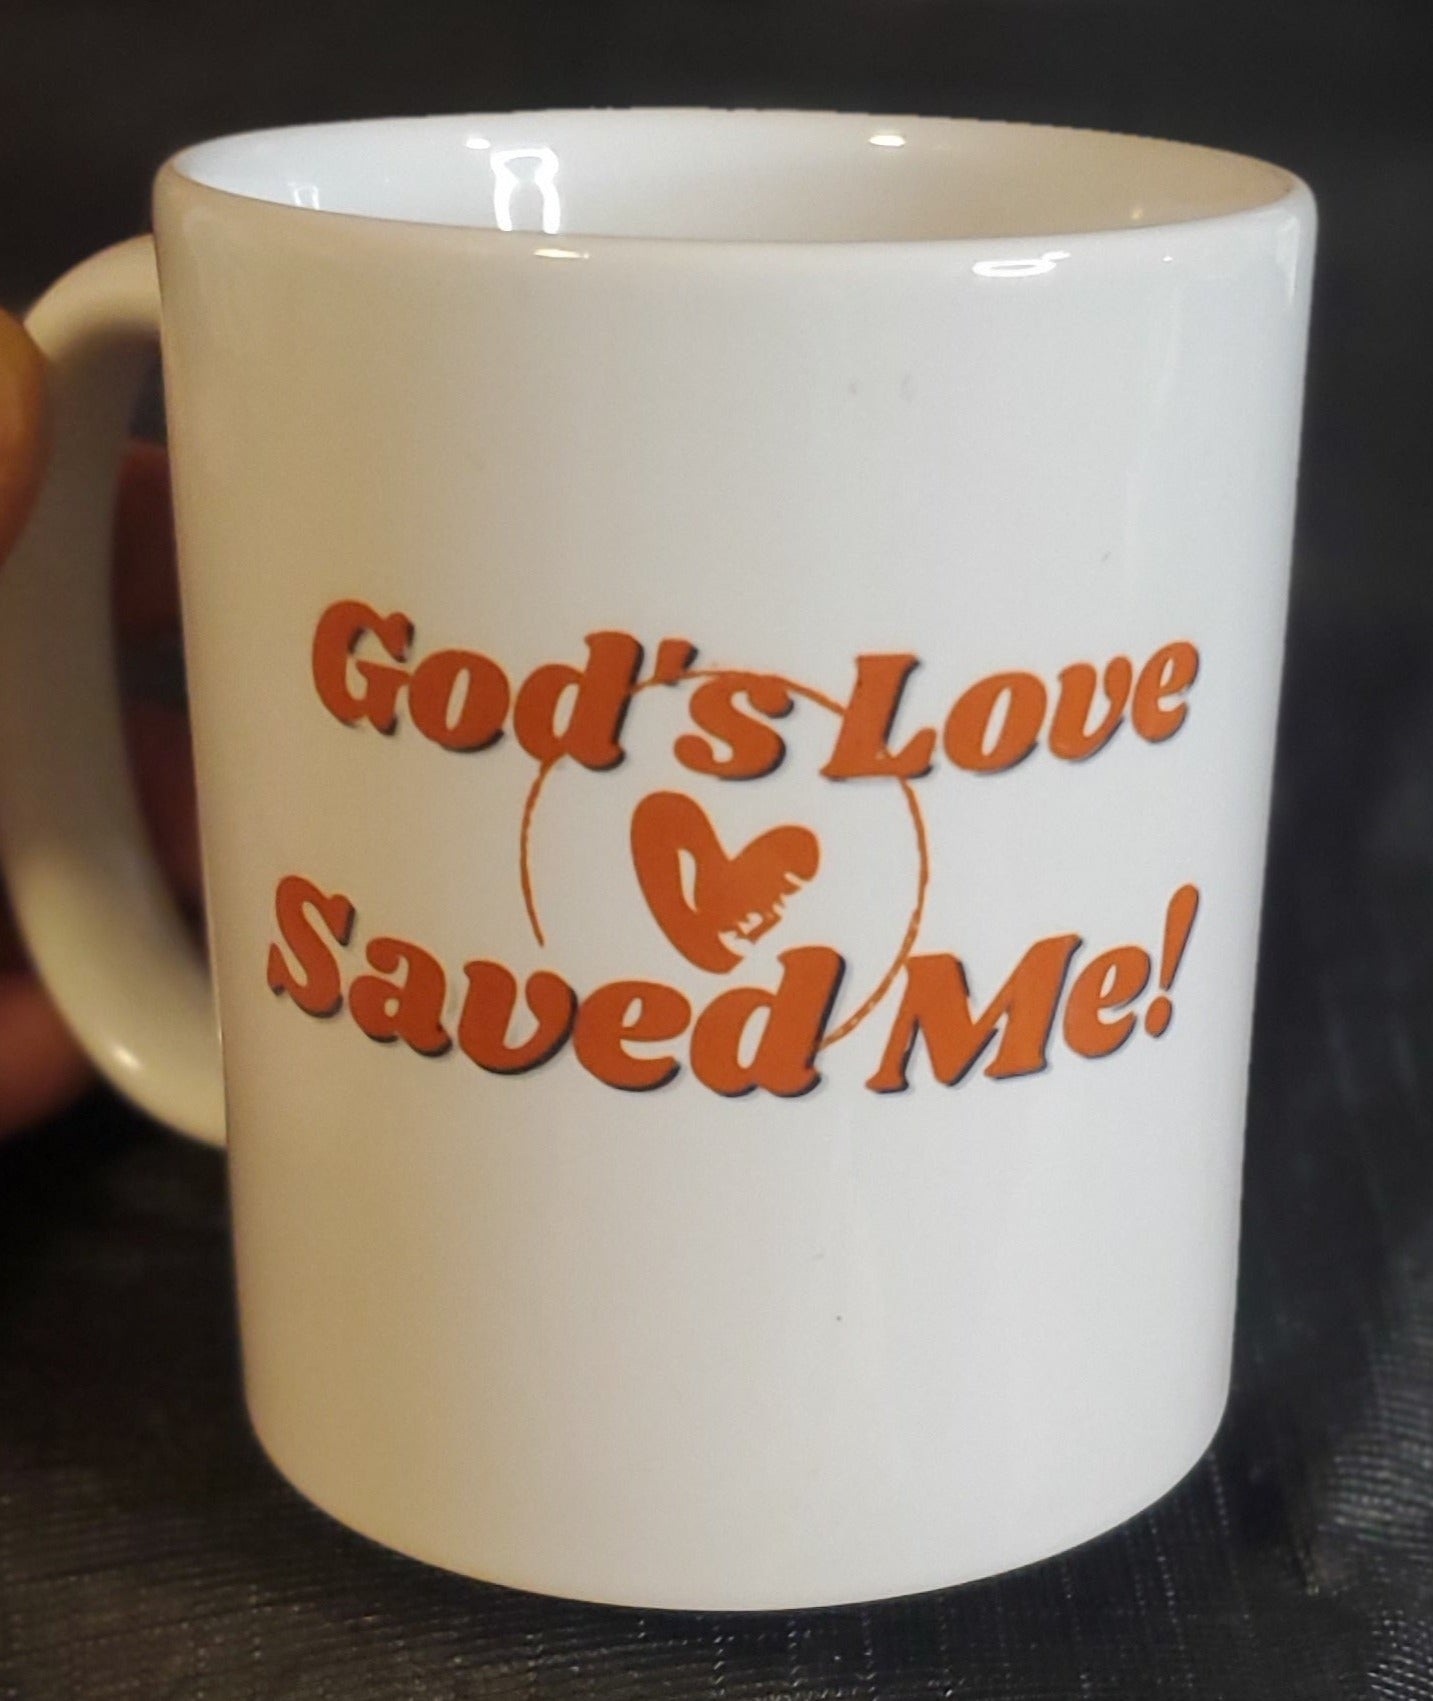 Classic White Mugs - Pick Your Statement – Church Is My Club™